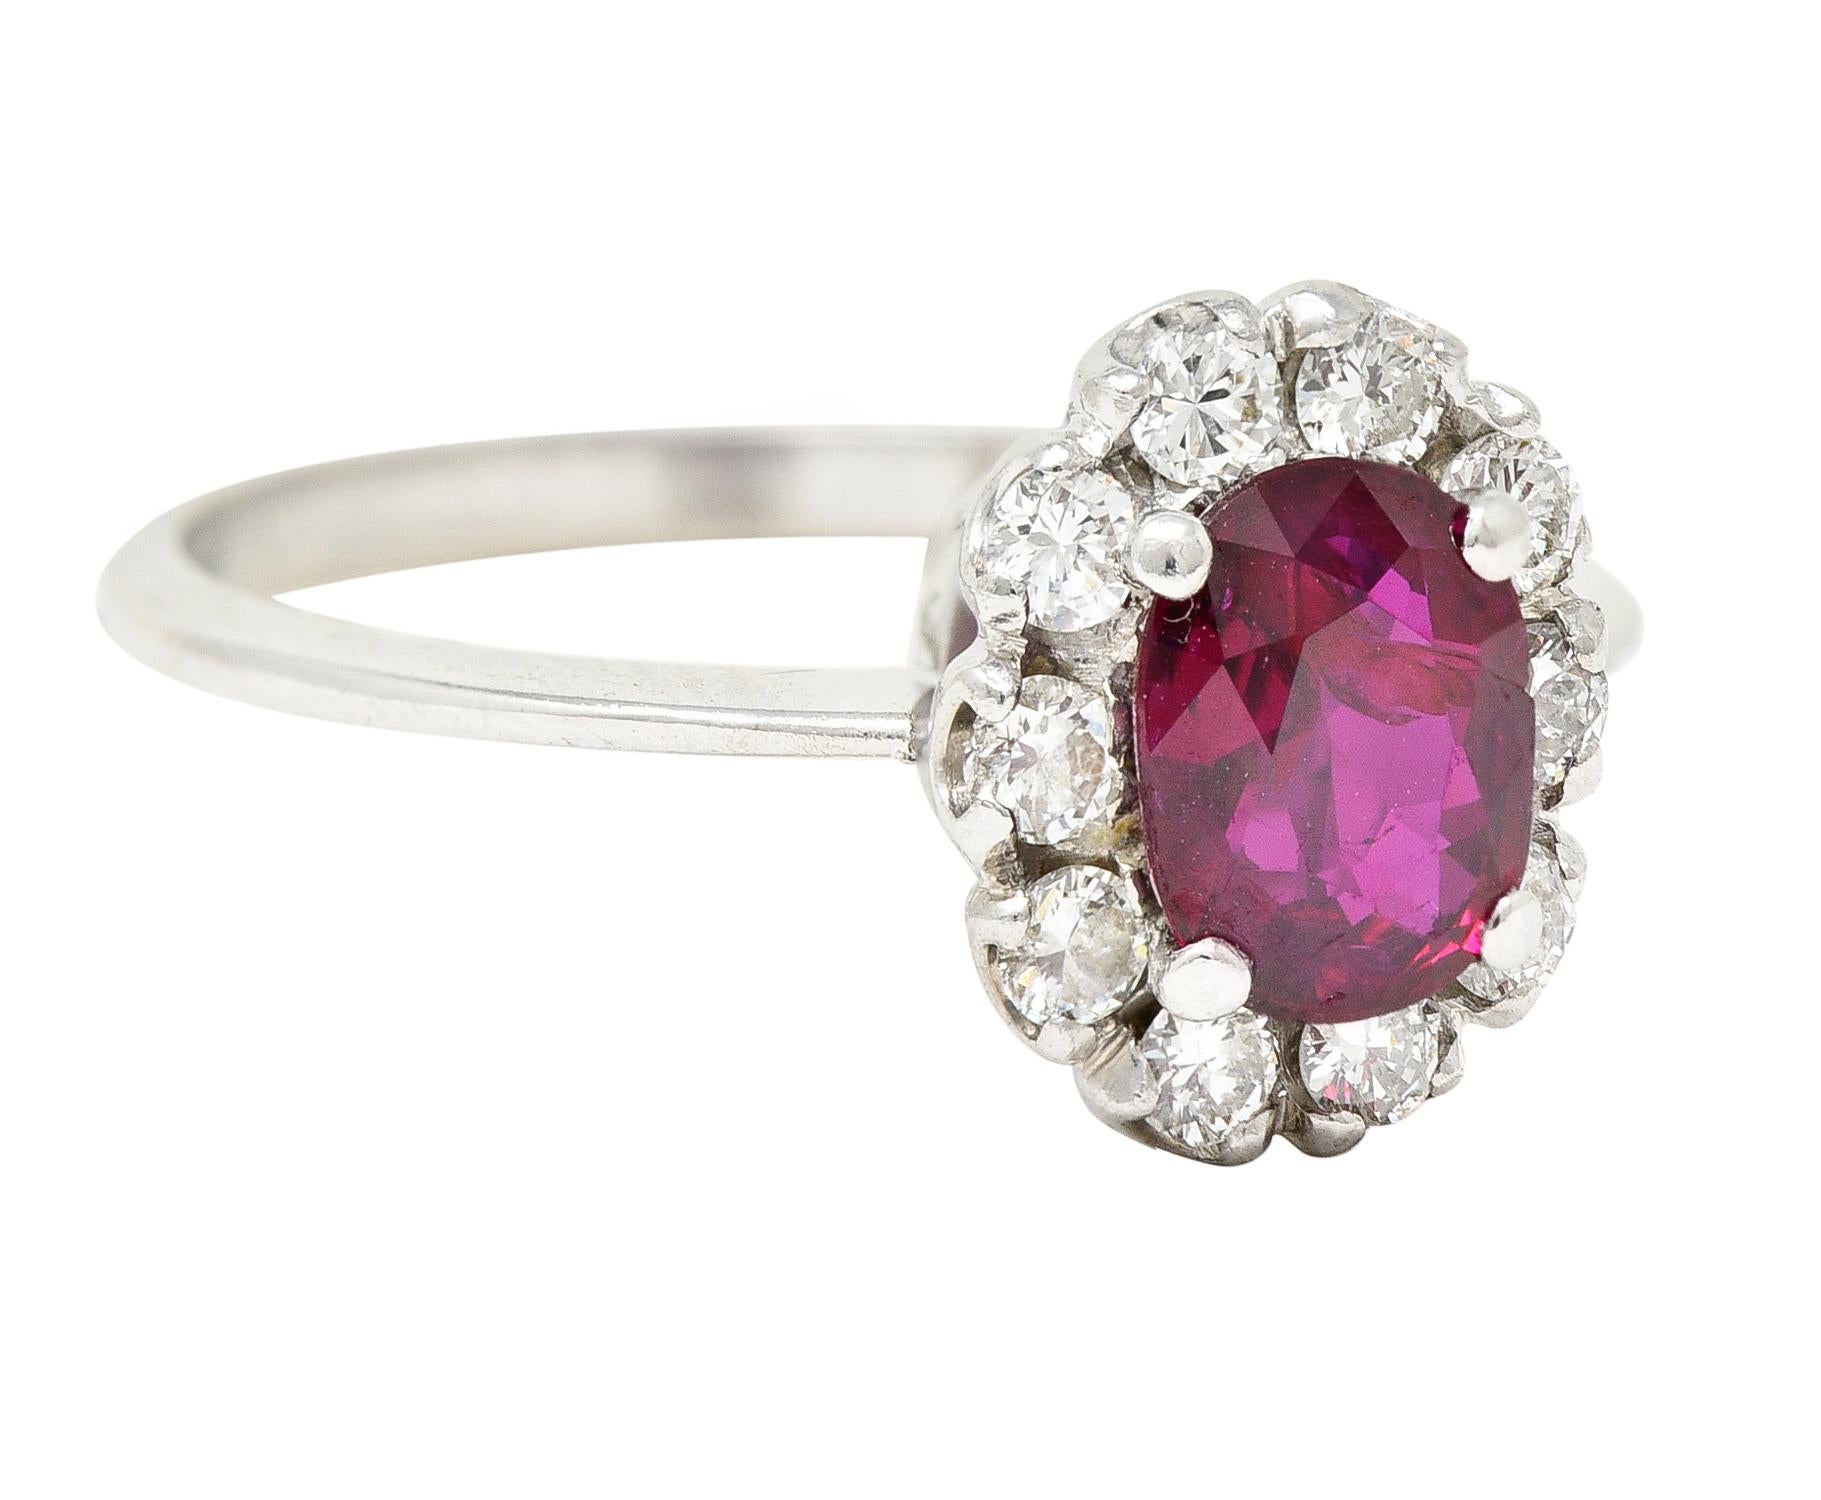 Centering an oval cut ruby weighing approximately 0.78 carat total. Transparent purplish-red in color with medium dark saturation. Prong set with a halo surround of round brilliant cut diamonds. Prong set and weighing approximately 0.30 carat total.